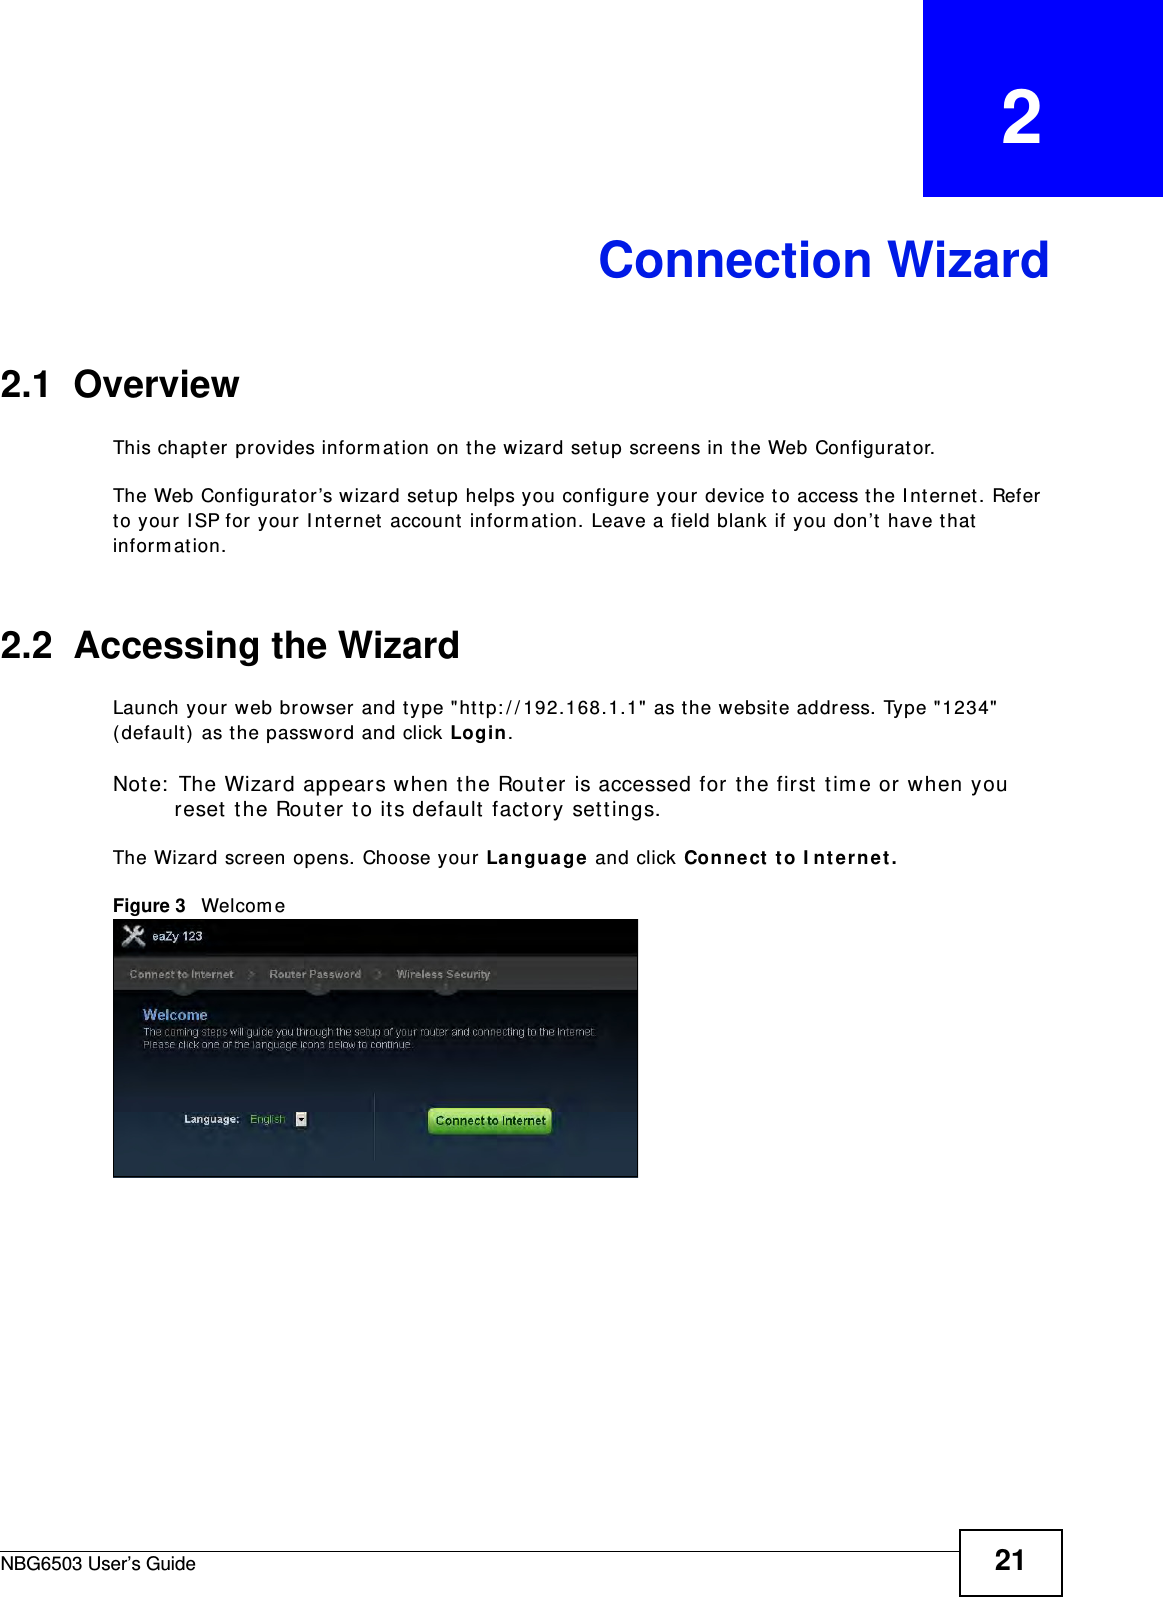 NBG6503 User’s Guide 21CHAPTER   2Connection Wizard2.1  OverviewThis chapter provides information on the wizard setup screens in the Web Configurator.The Web Configurator’s wizard setup helps you configure your device to access the Internet. Refer to your ISP for your Internet account information. Leave a field blank if you don’t have that information.2.2  Accessing the WizardLaunch your web browser and type &quot;http://192.168.1.1&quot; as the website address. Type &quot;1234&quot; (default) as the password and click Login.Note: The Wizard appears when the Router is accessed for the first time or when you reset the Router to its default factory settings.The Wizard screen opens. Choose your Language and click Connect to Internet.Figure 3   Welcome 